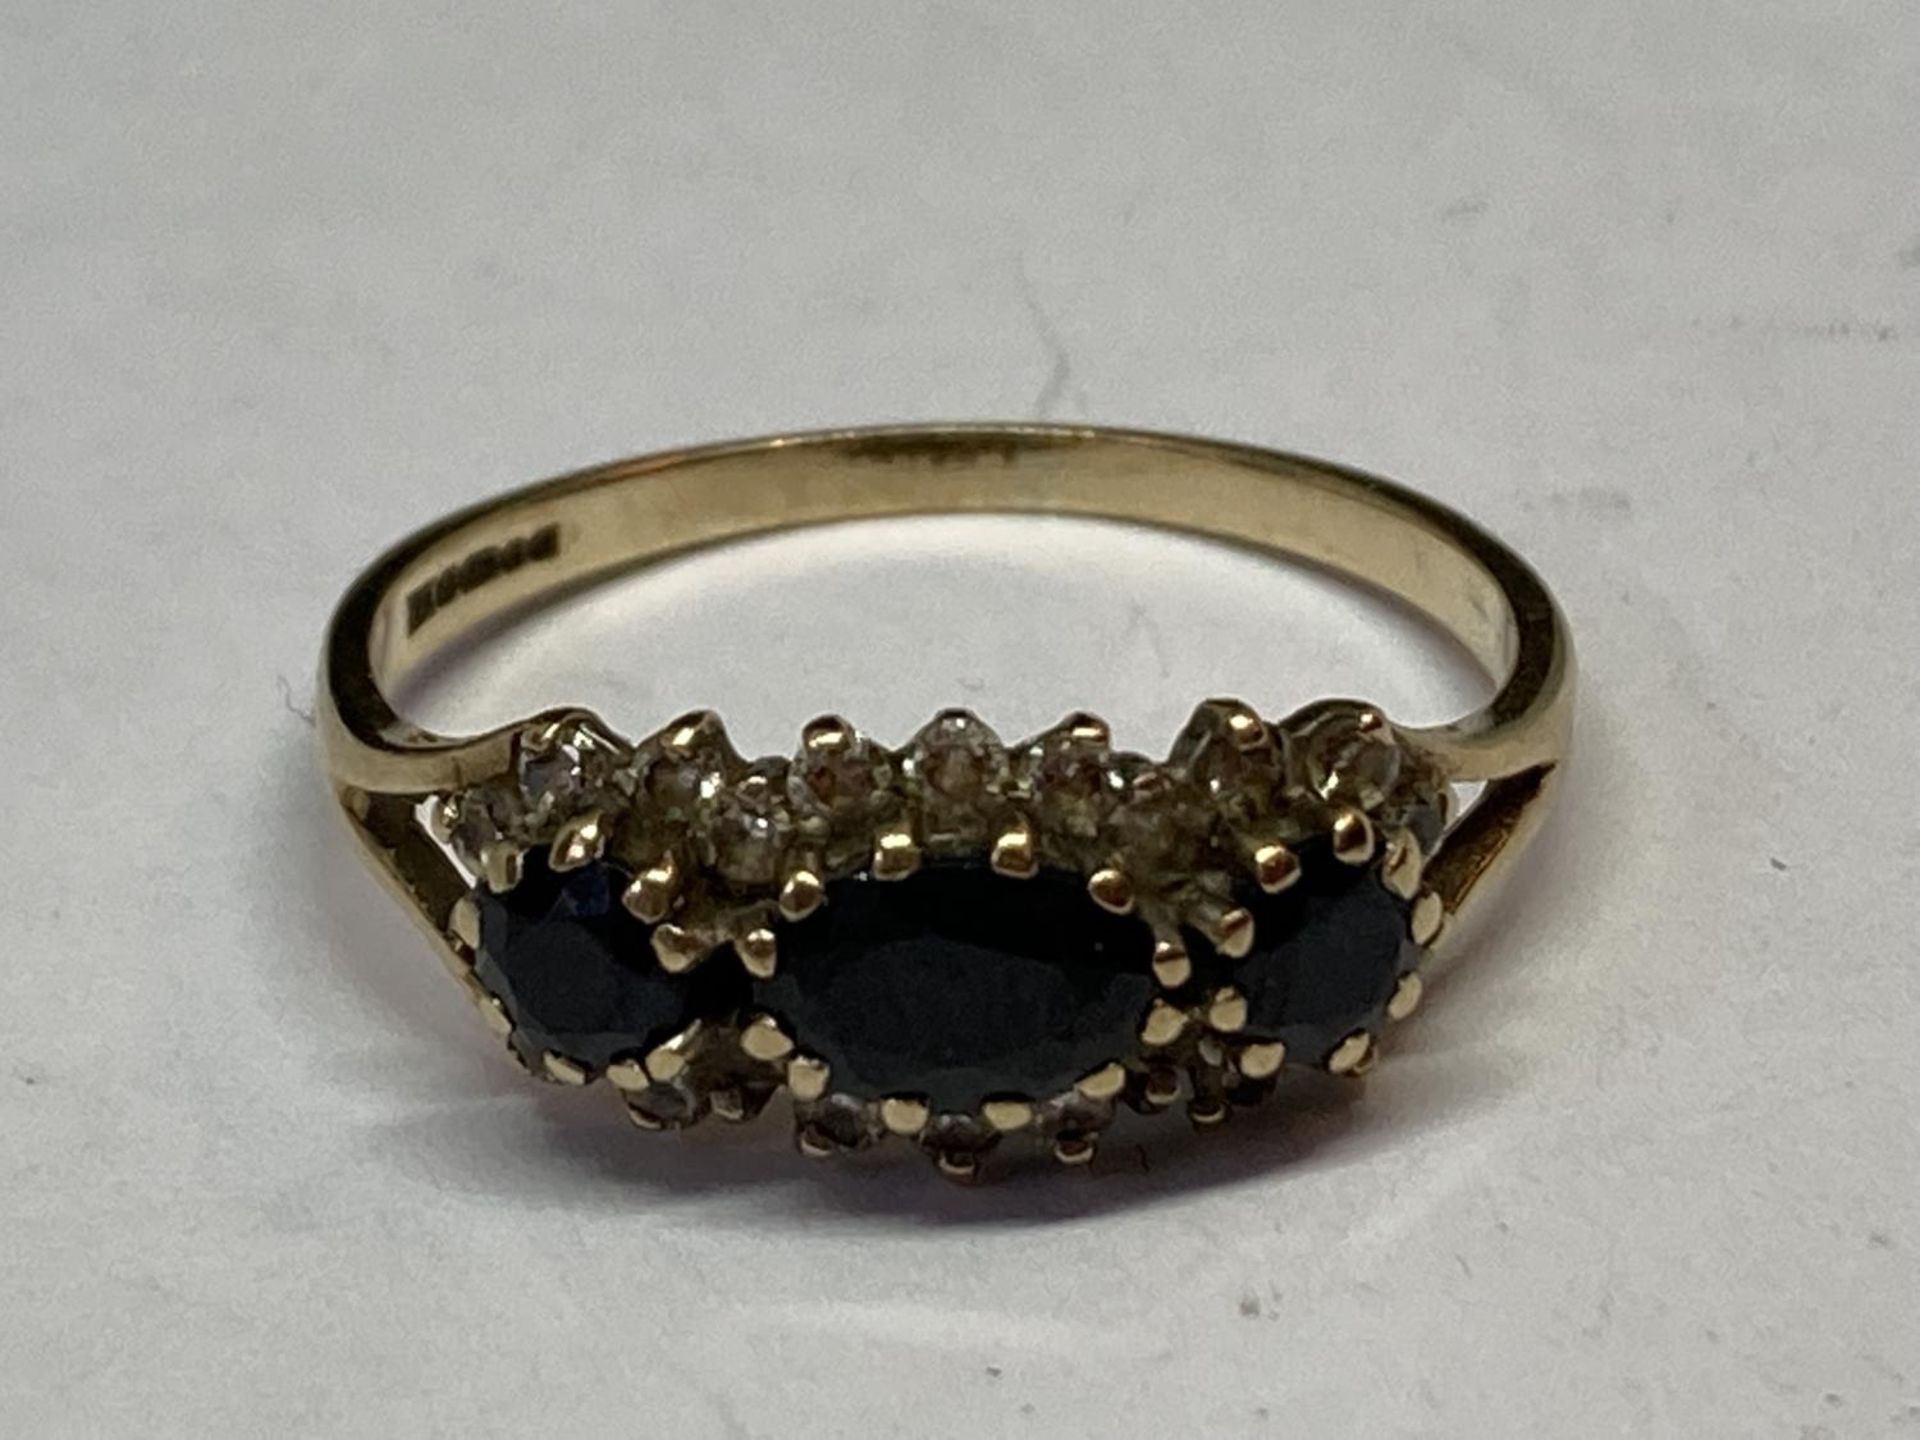 A 9 CARAT GOLD RING WITH THREE SAPPHIRES SURROUNDED BY CUBIC ZIRCONIAS SIZE Q